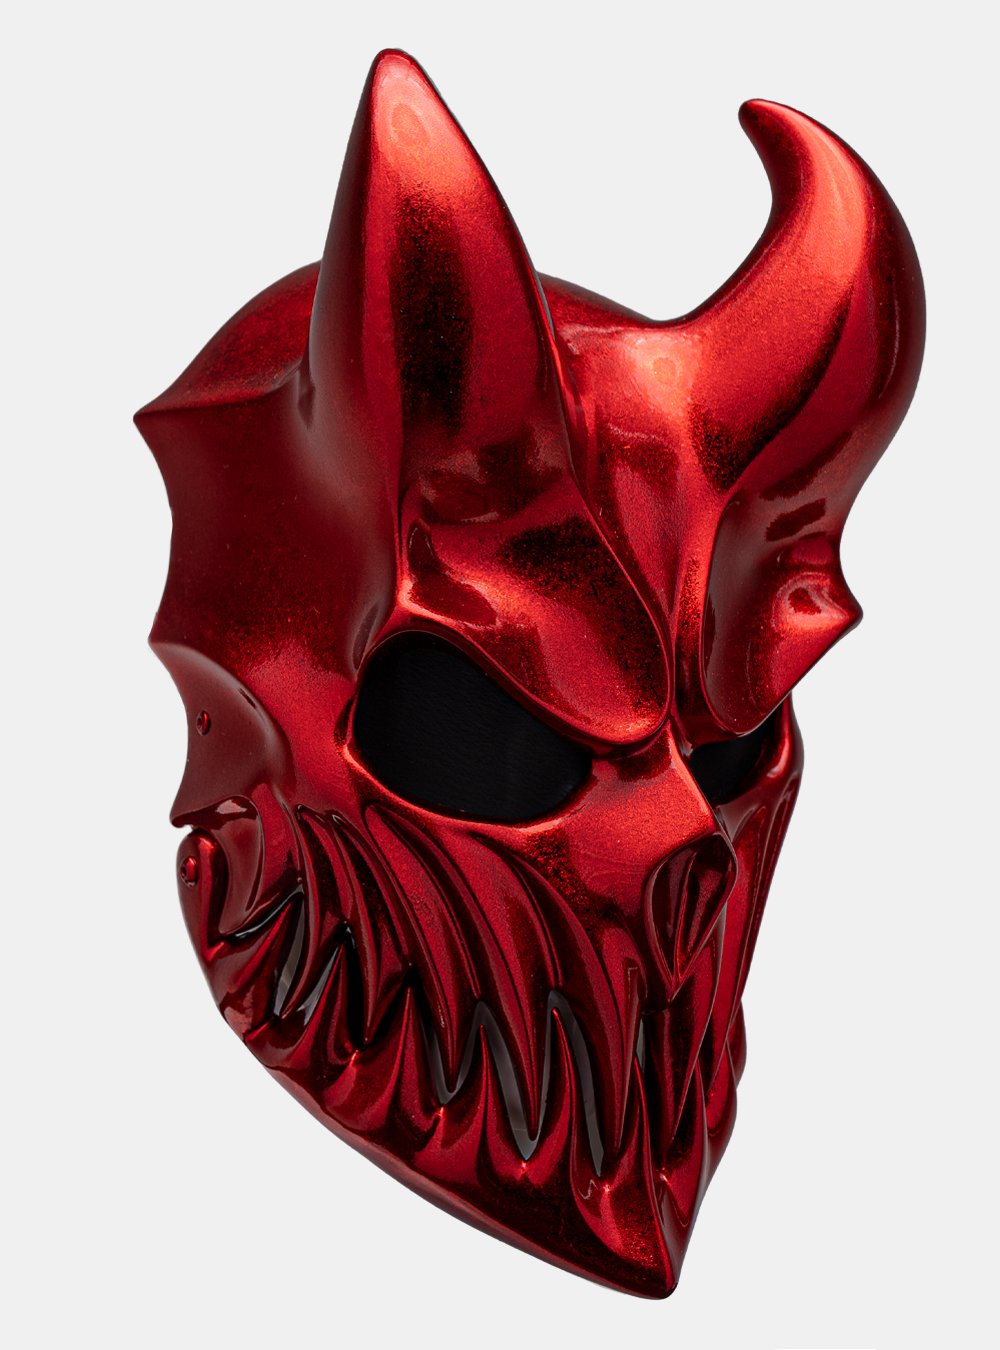 NEW (SLAUGHTER TO PREVAIL) ALEX TERRIBLE MASK “KID OF DARKNESS” (VELVET RED)